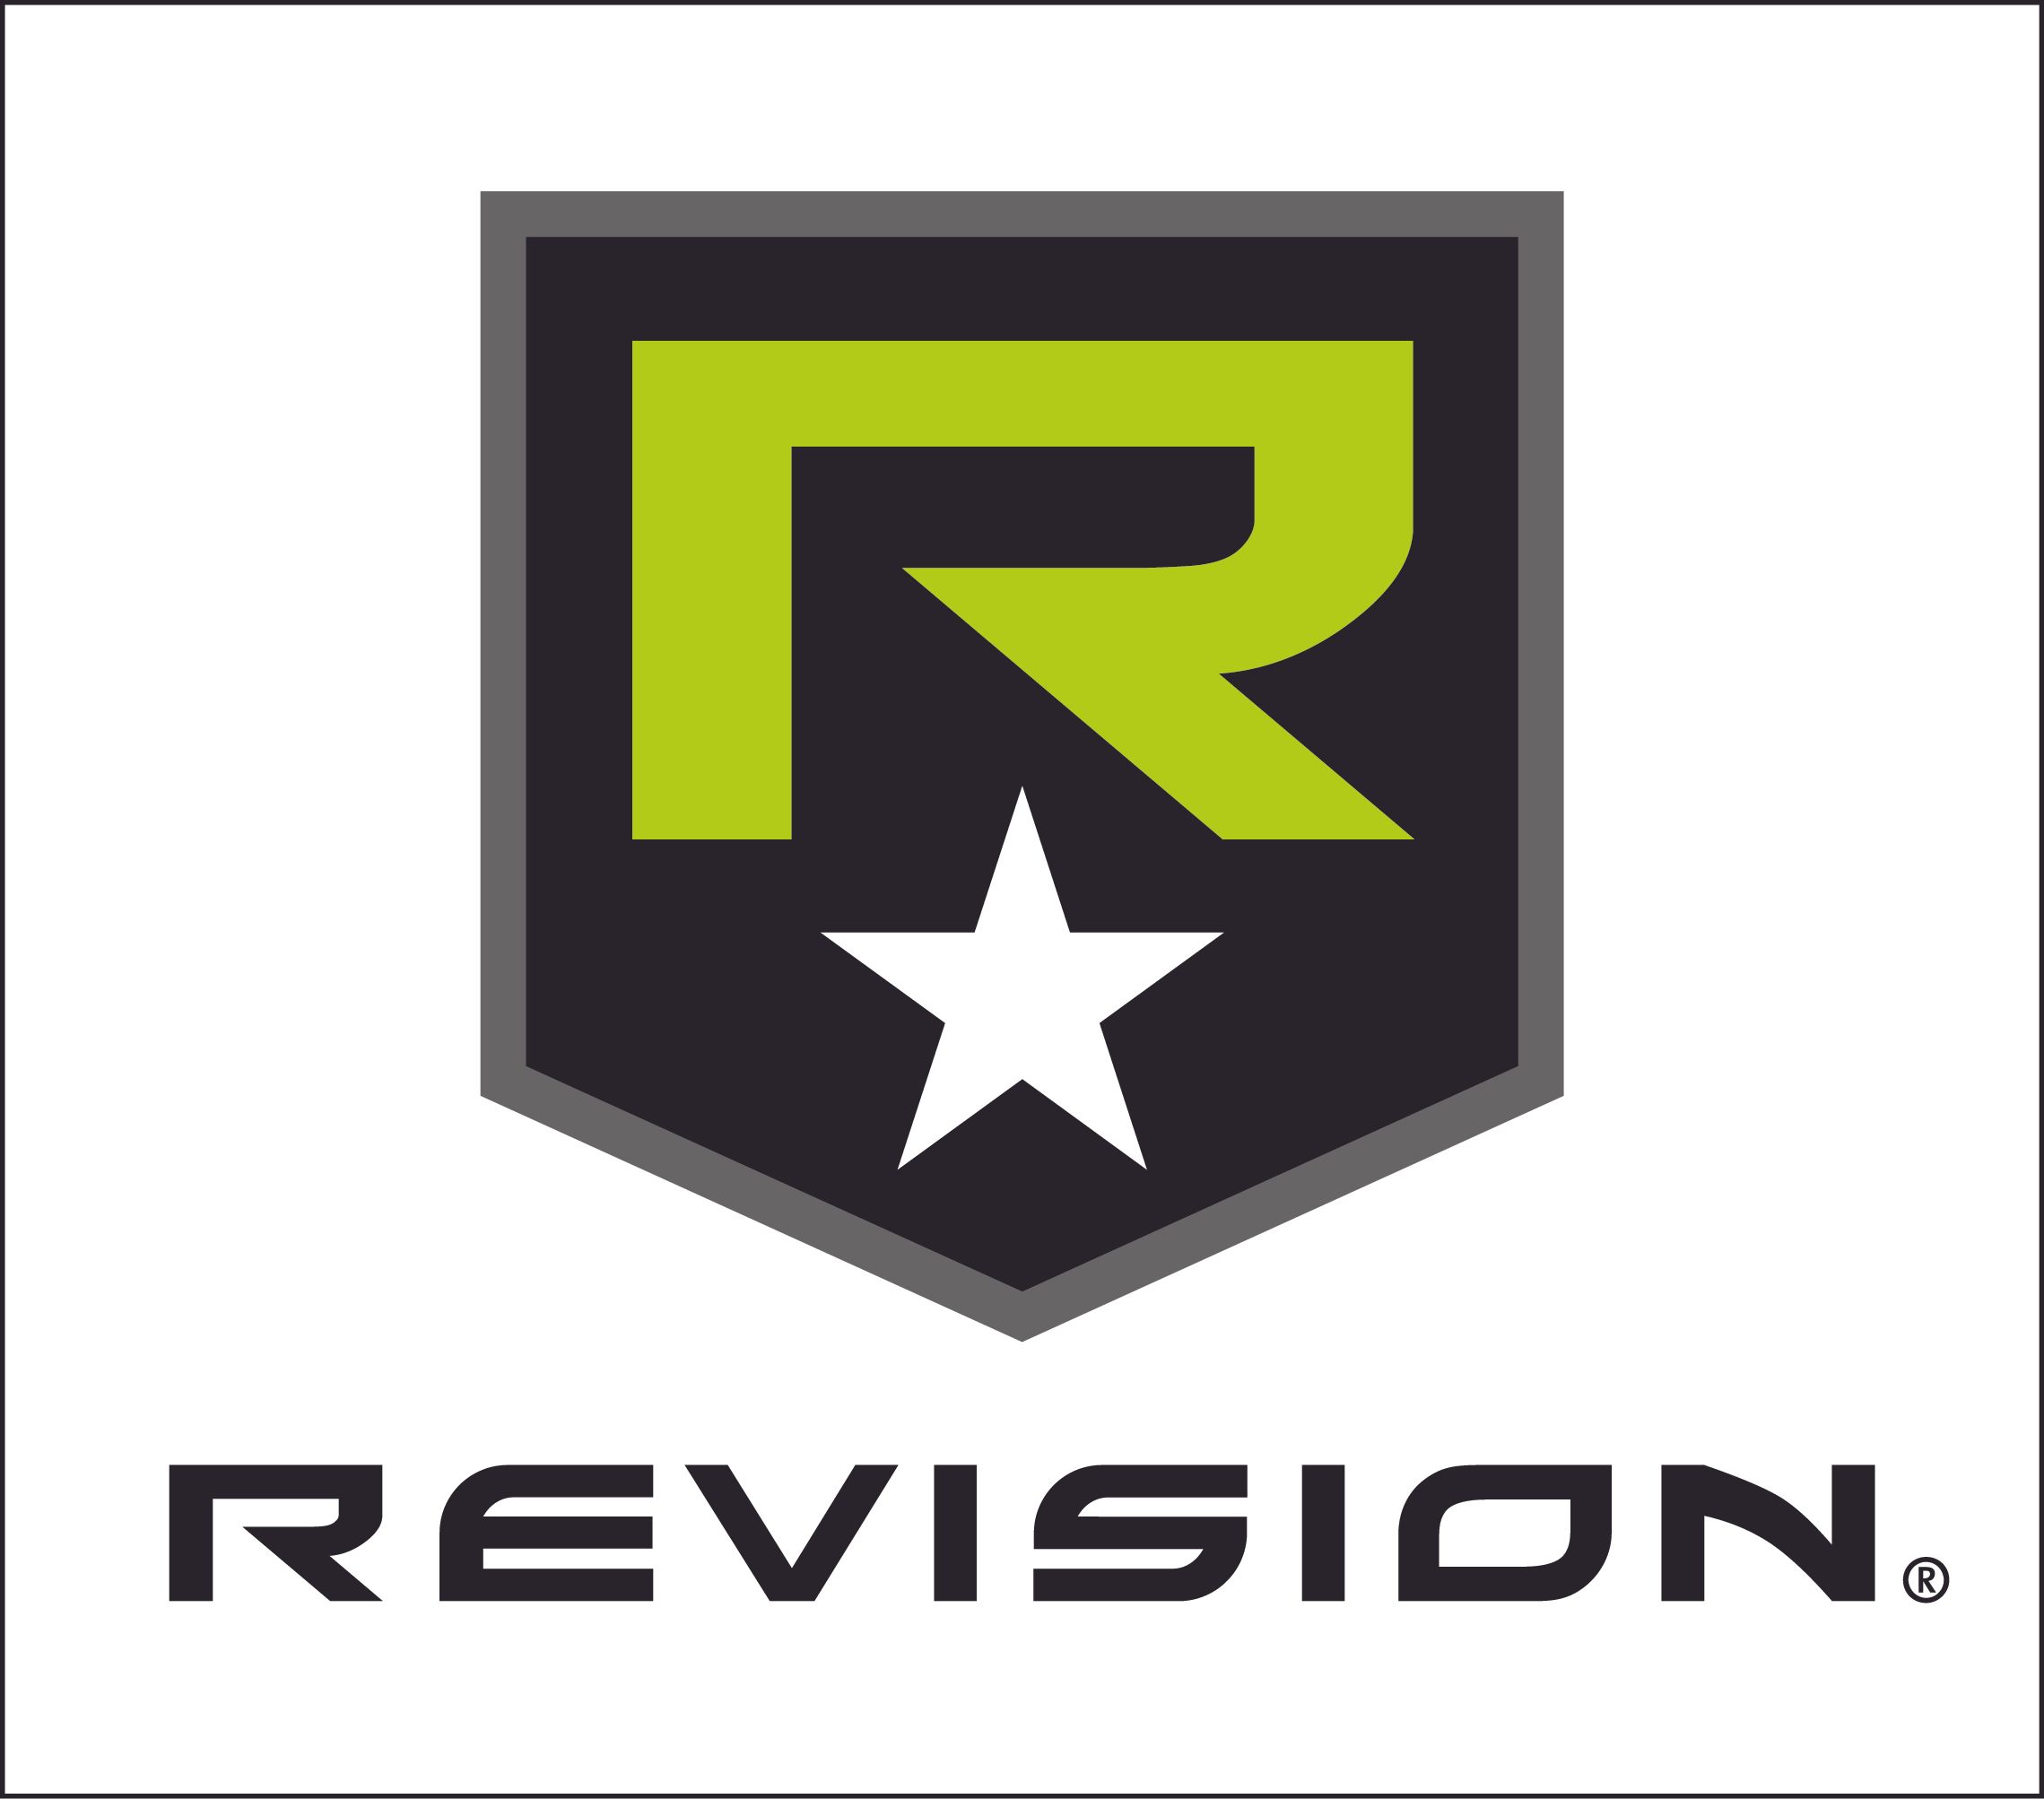 Revision Military